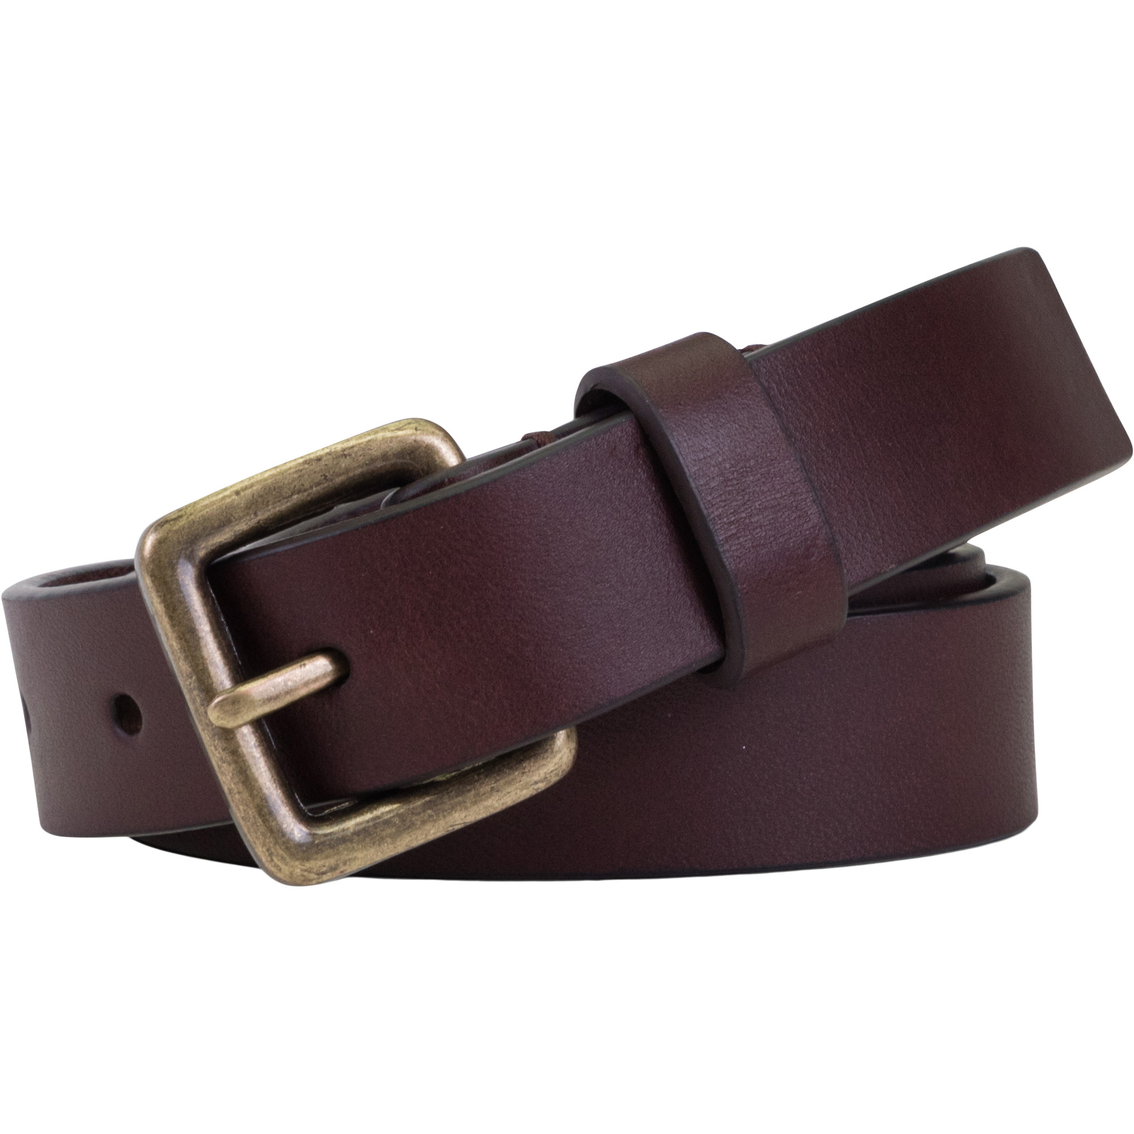 Timberland Leather 25mm Classic Square Tip Belt | Belts | Clothing ...